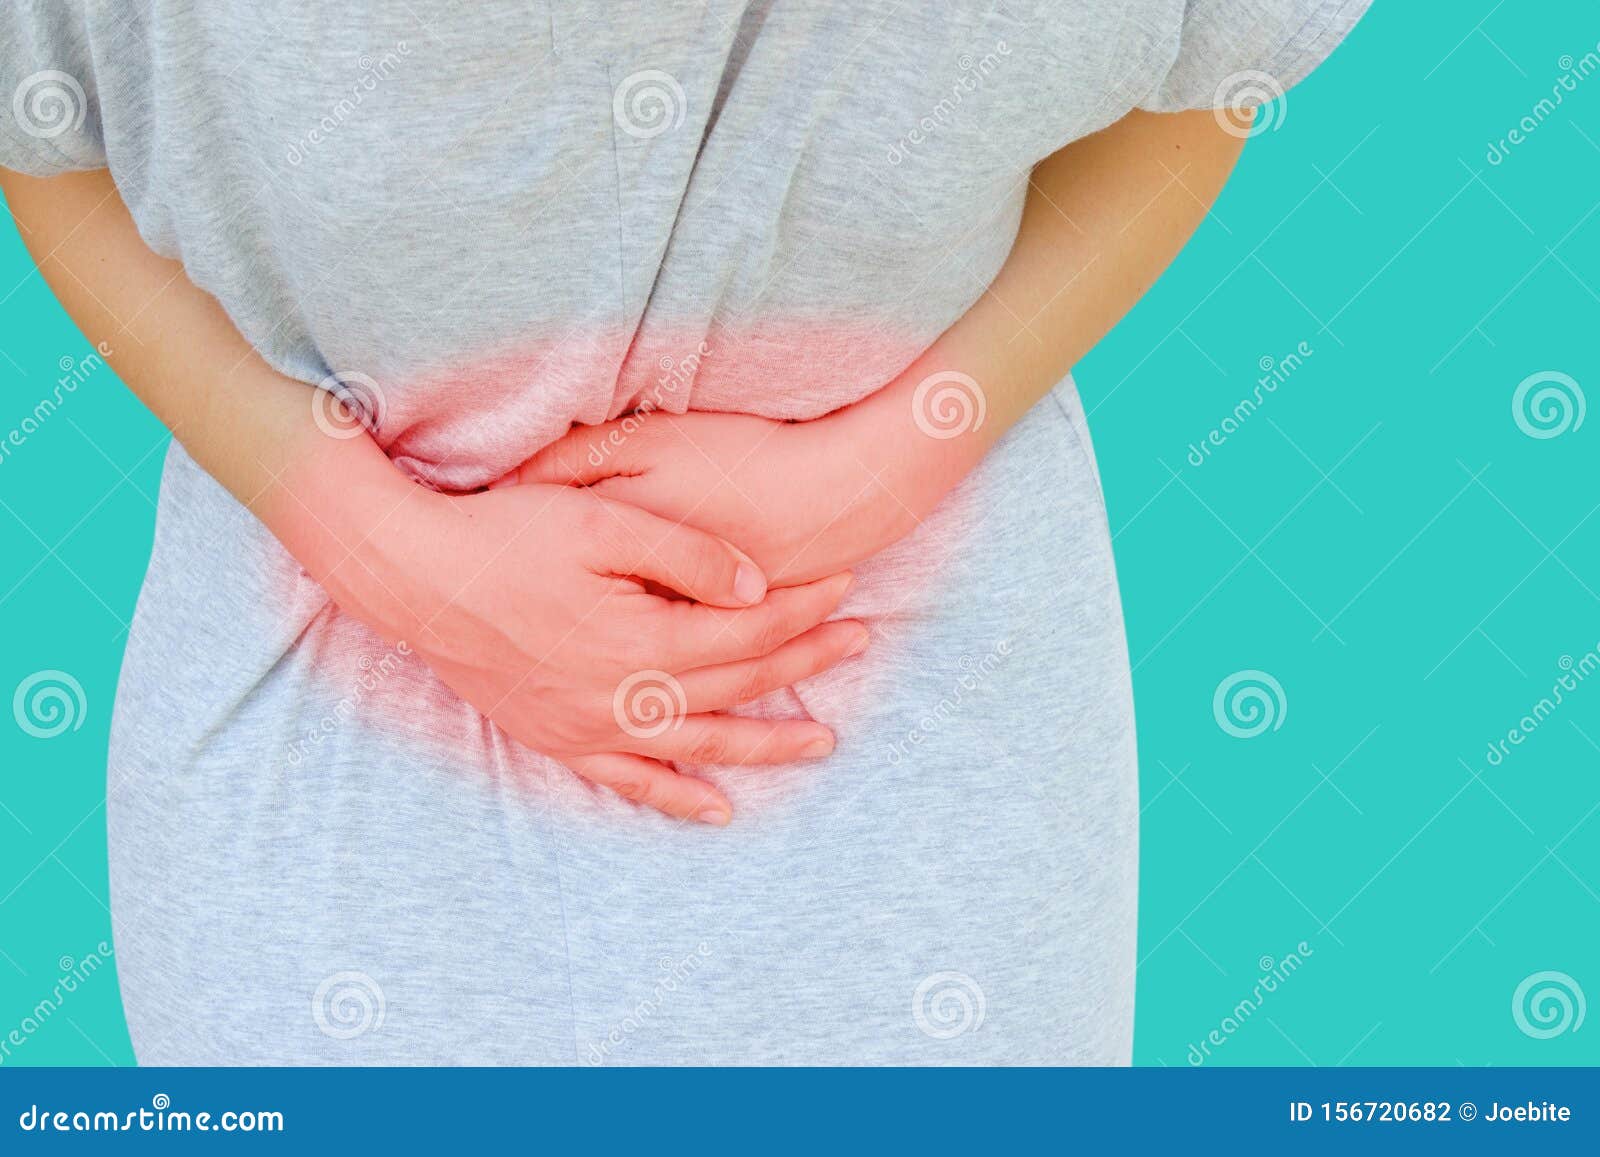 young asian women hold hands in painful areas which may be caused by gastritis, menstruation period cramp, abdominal pain, stomach